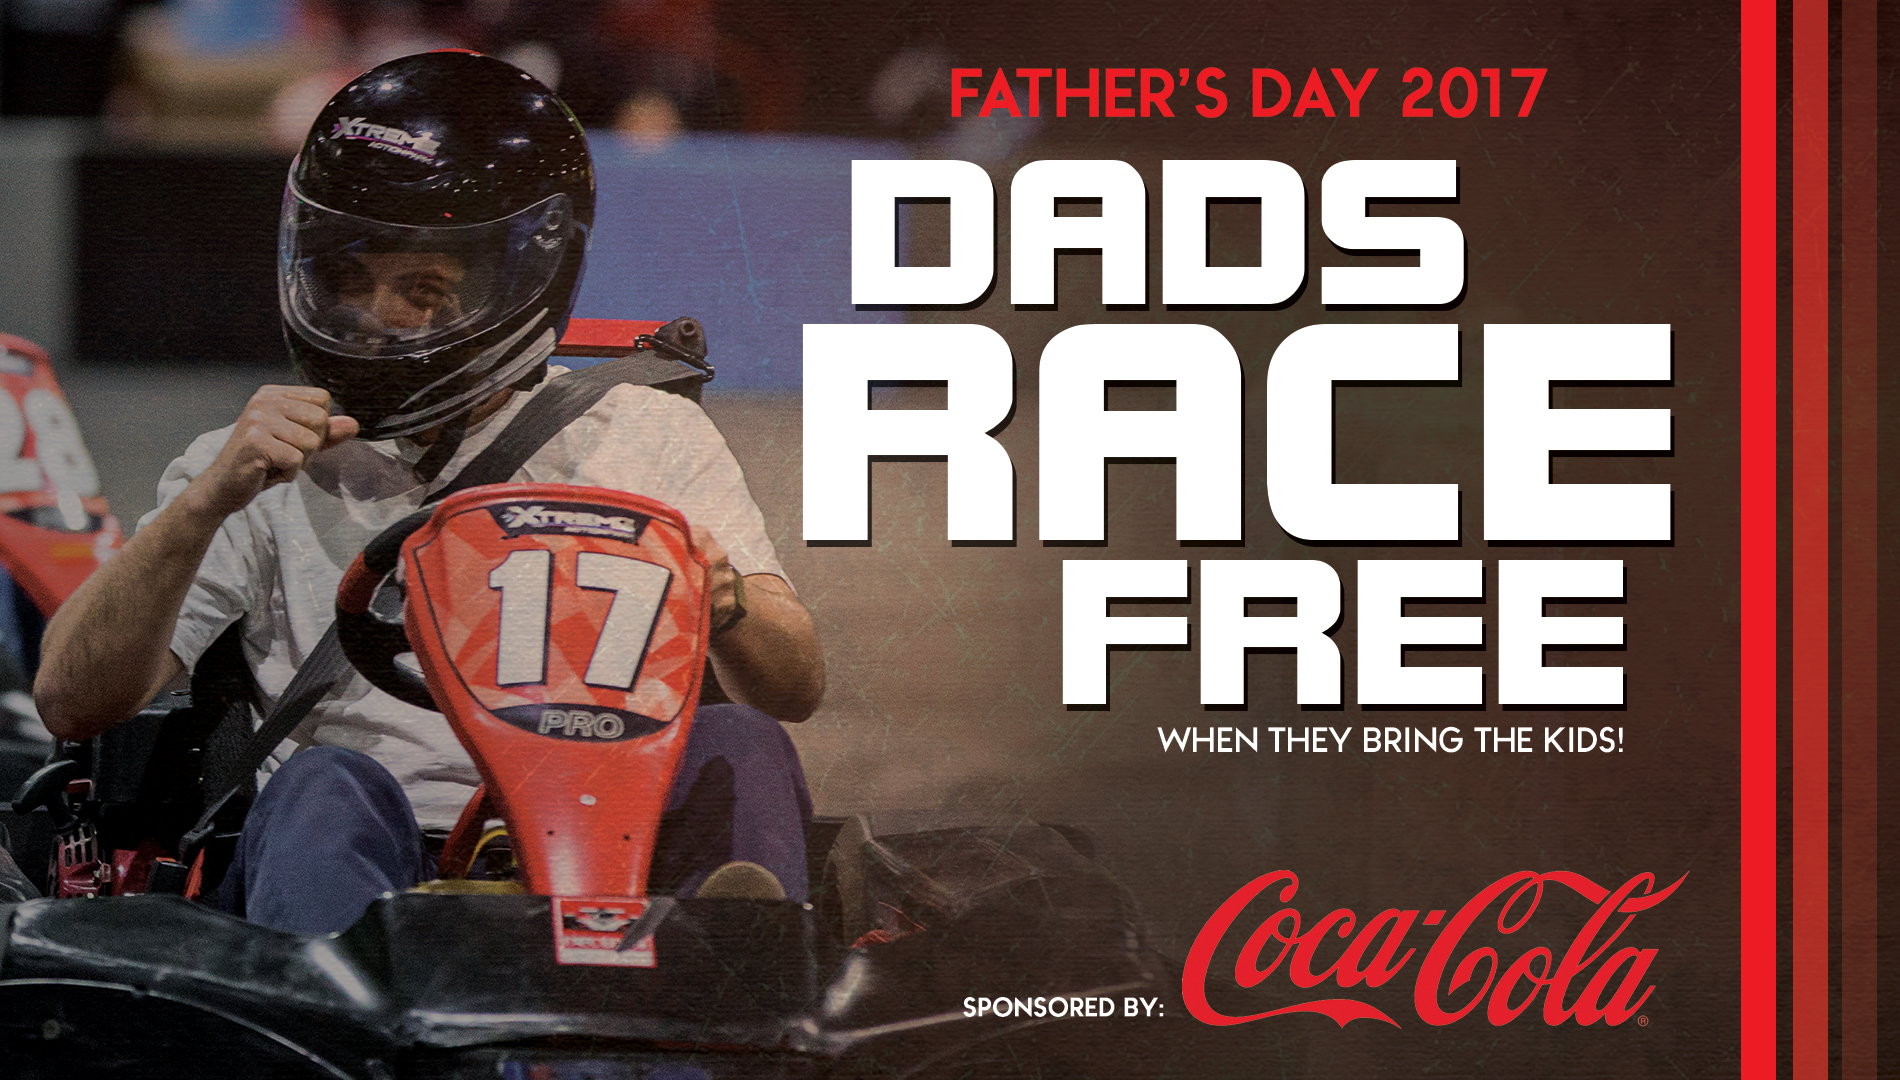 Dads Race Free on Father’s Day 2017